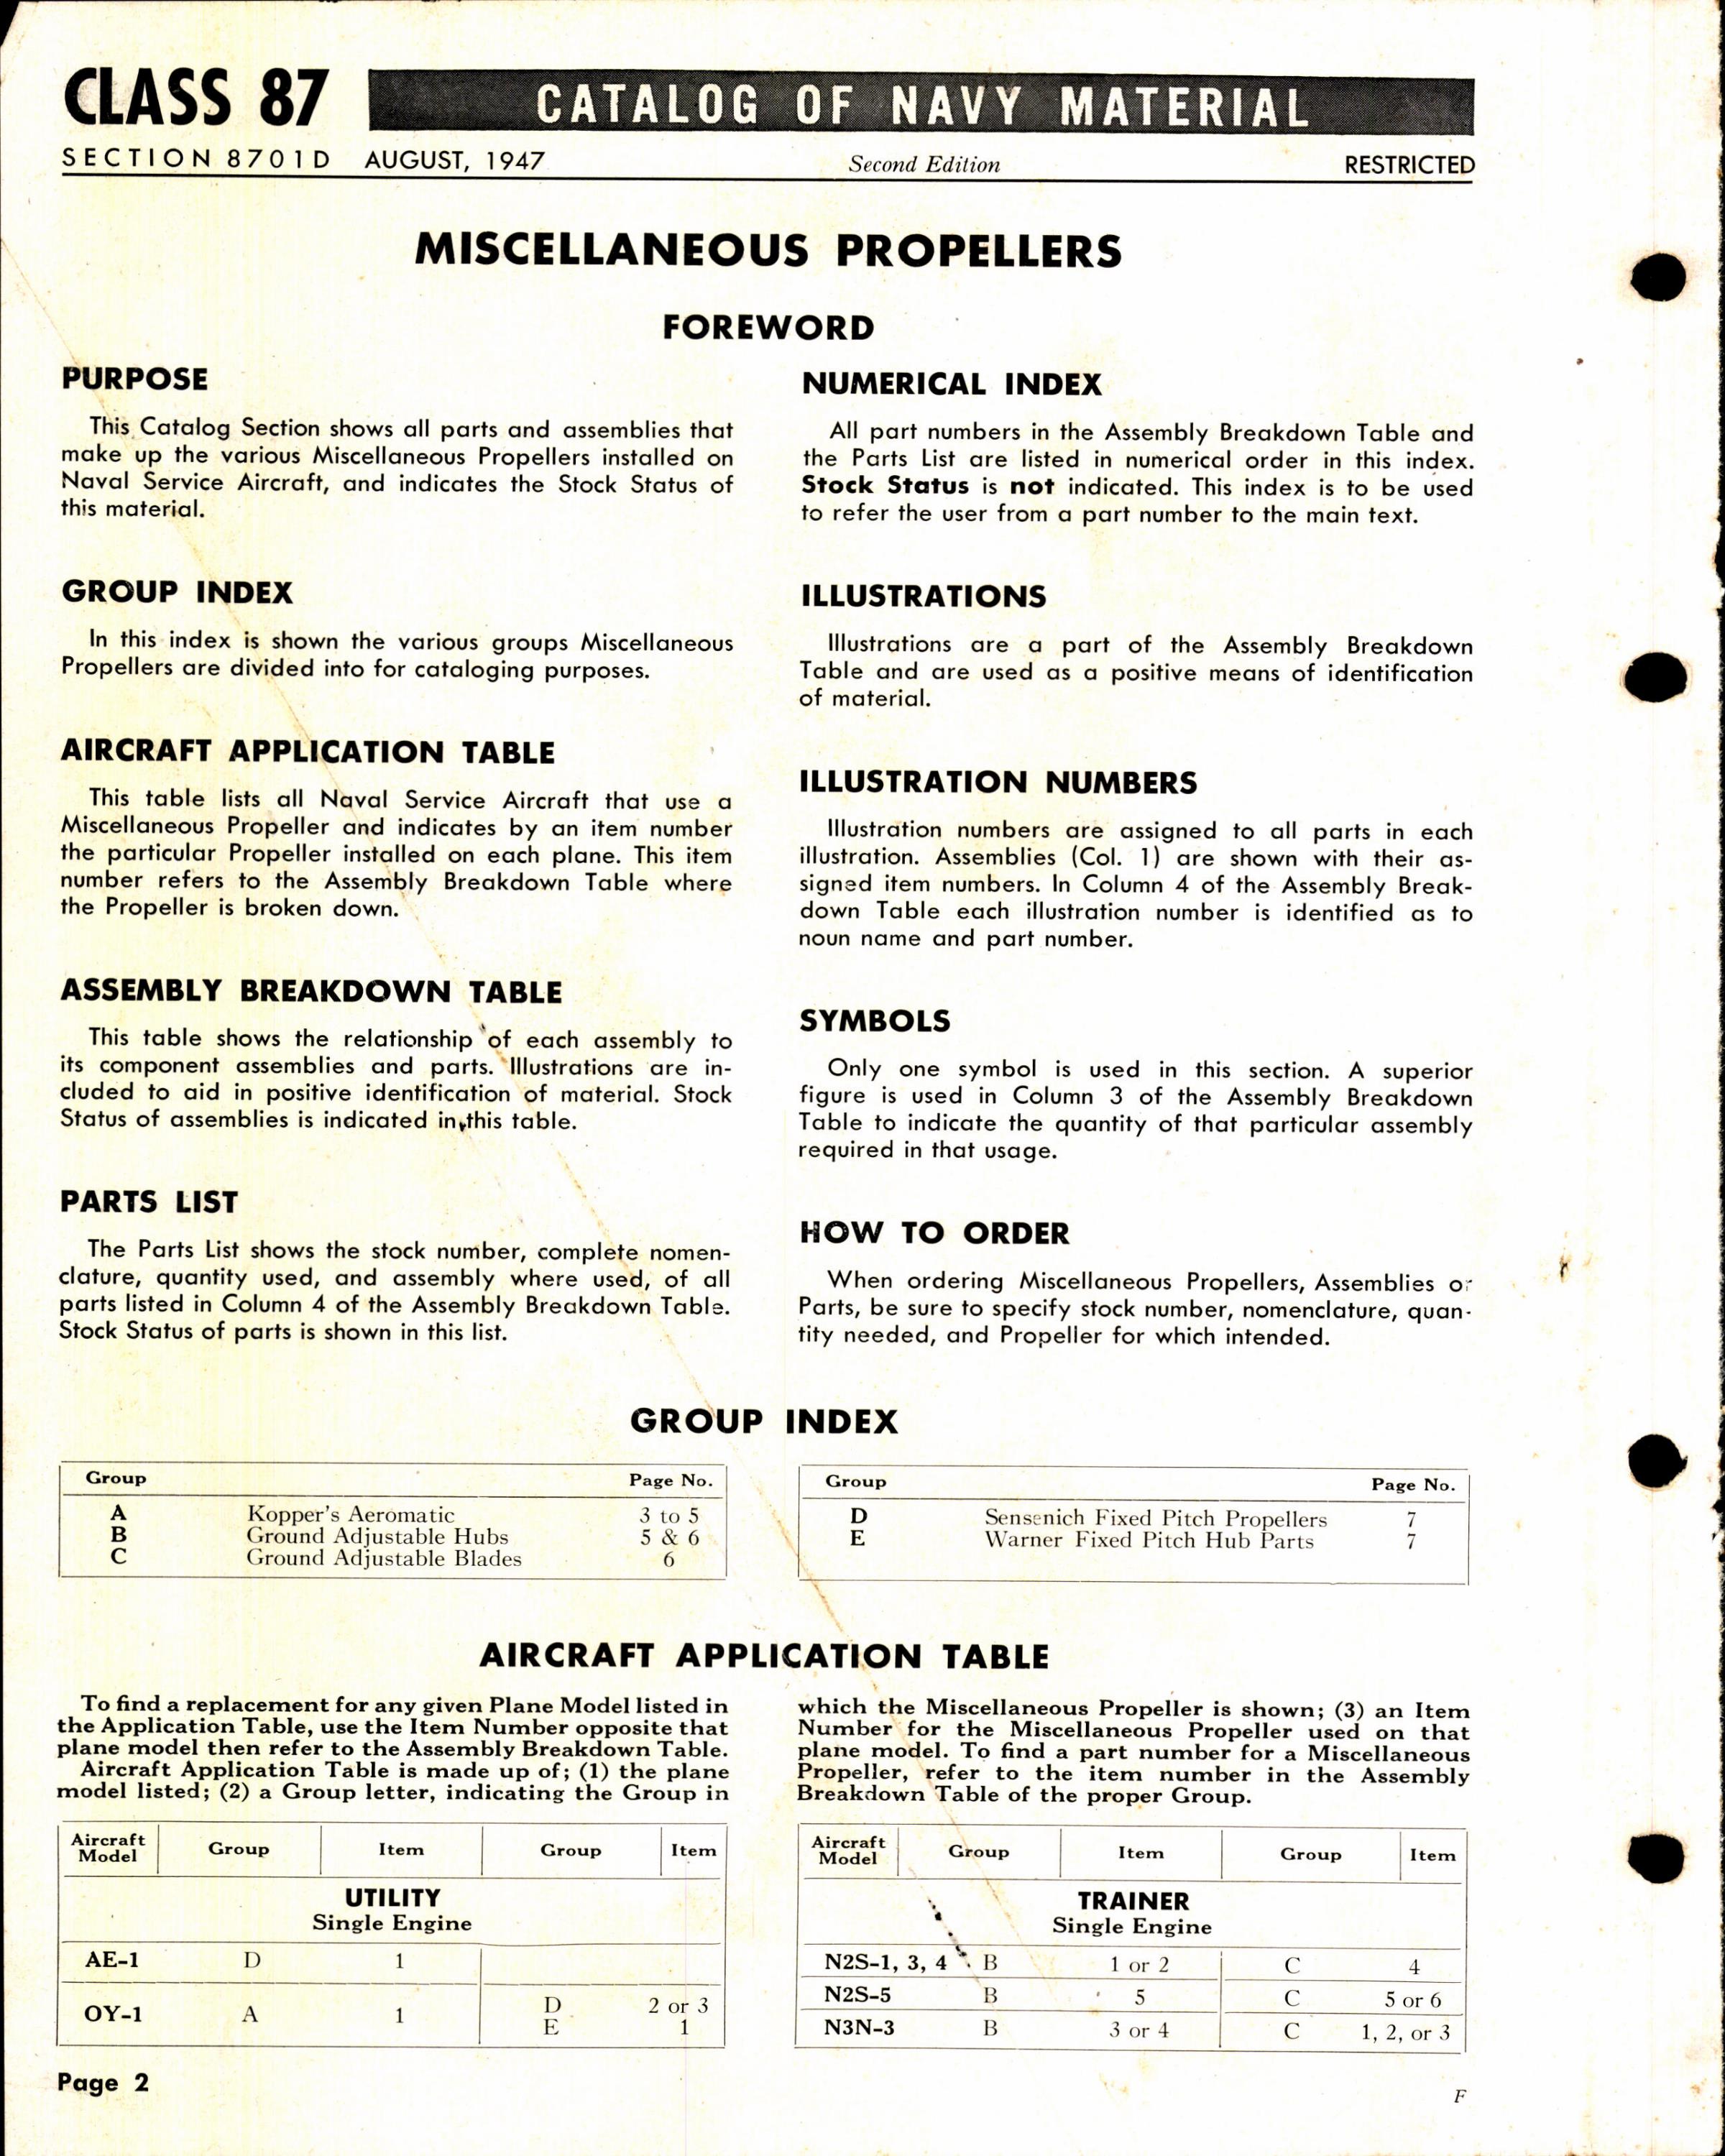 Sample page 2 from AirCorps Library document: Miscellaneous Propellers